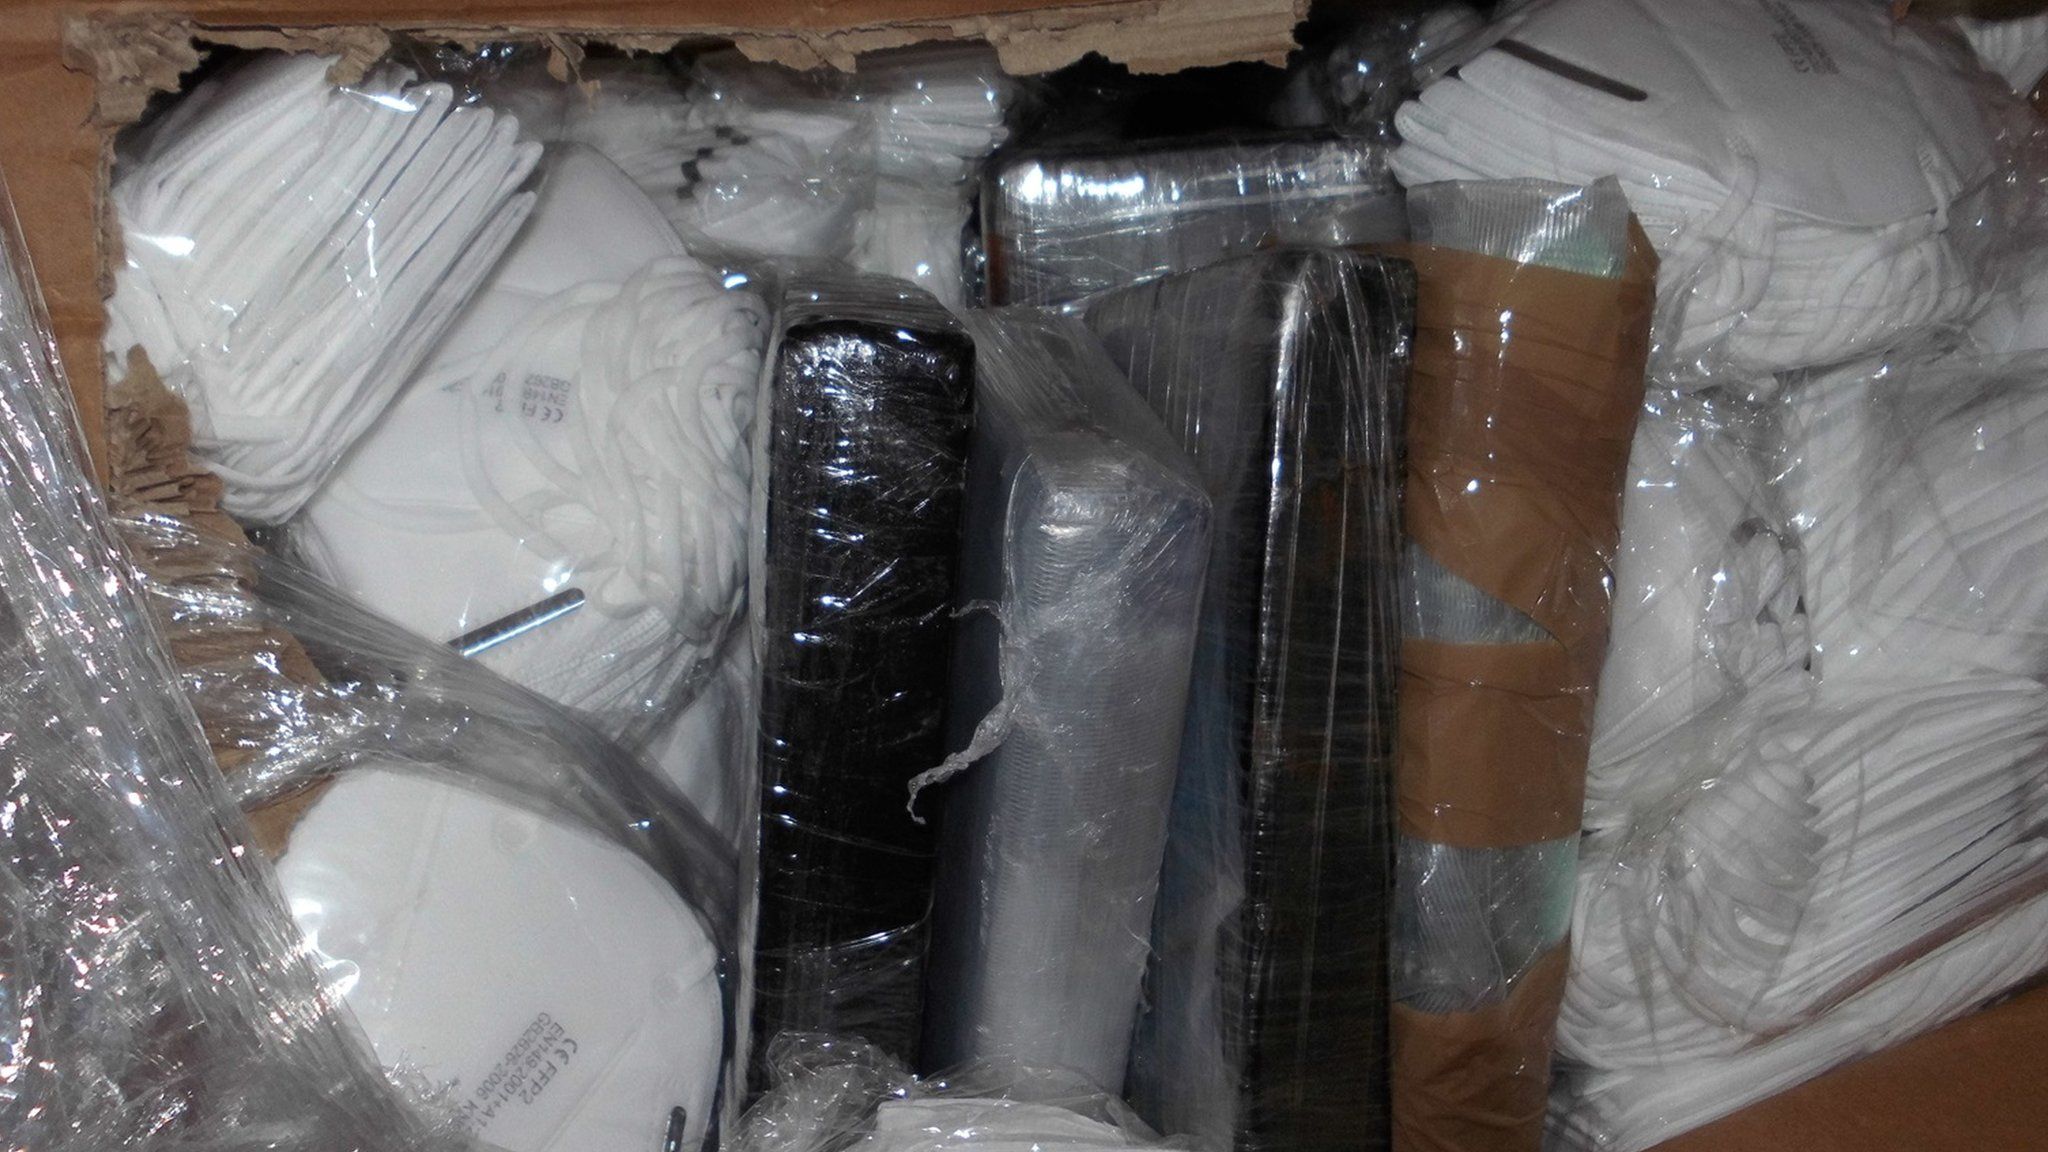 Cocaine packages hidden in face masks